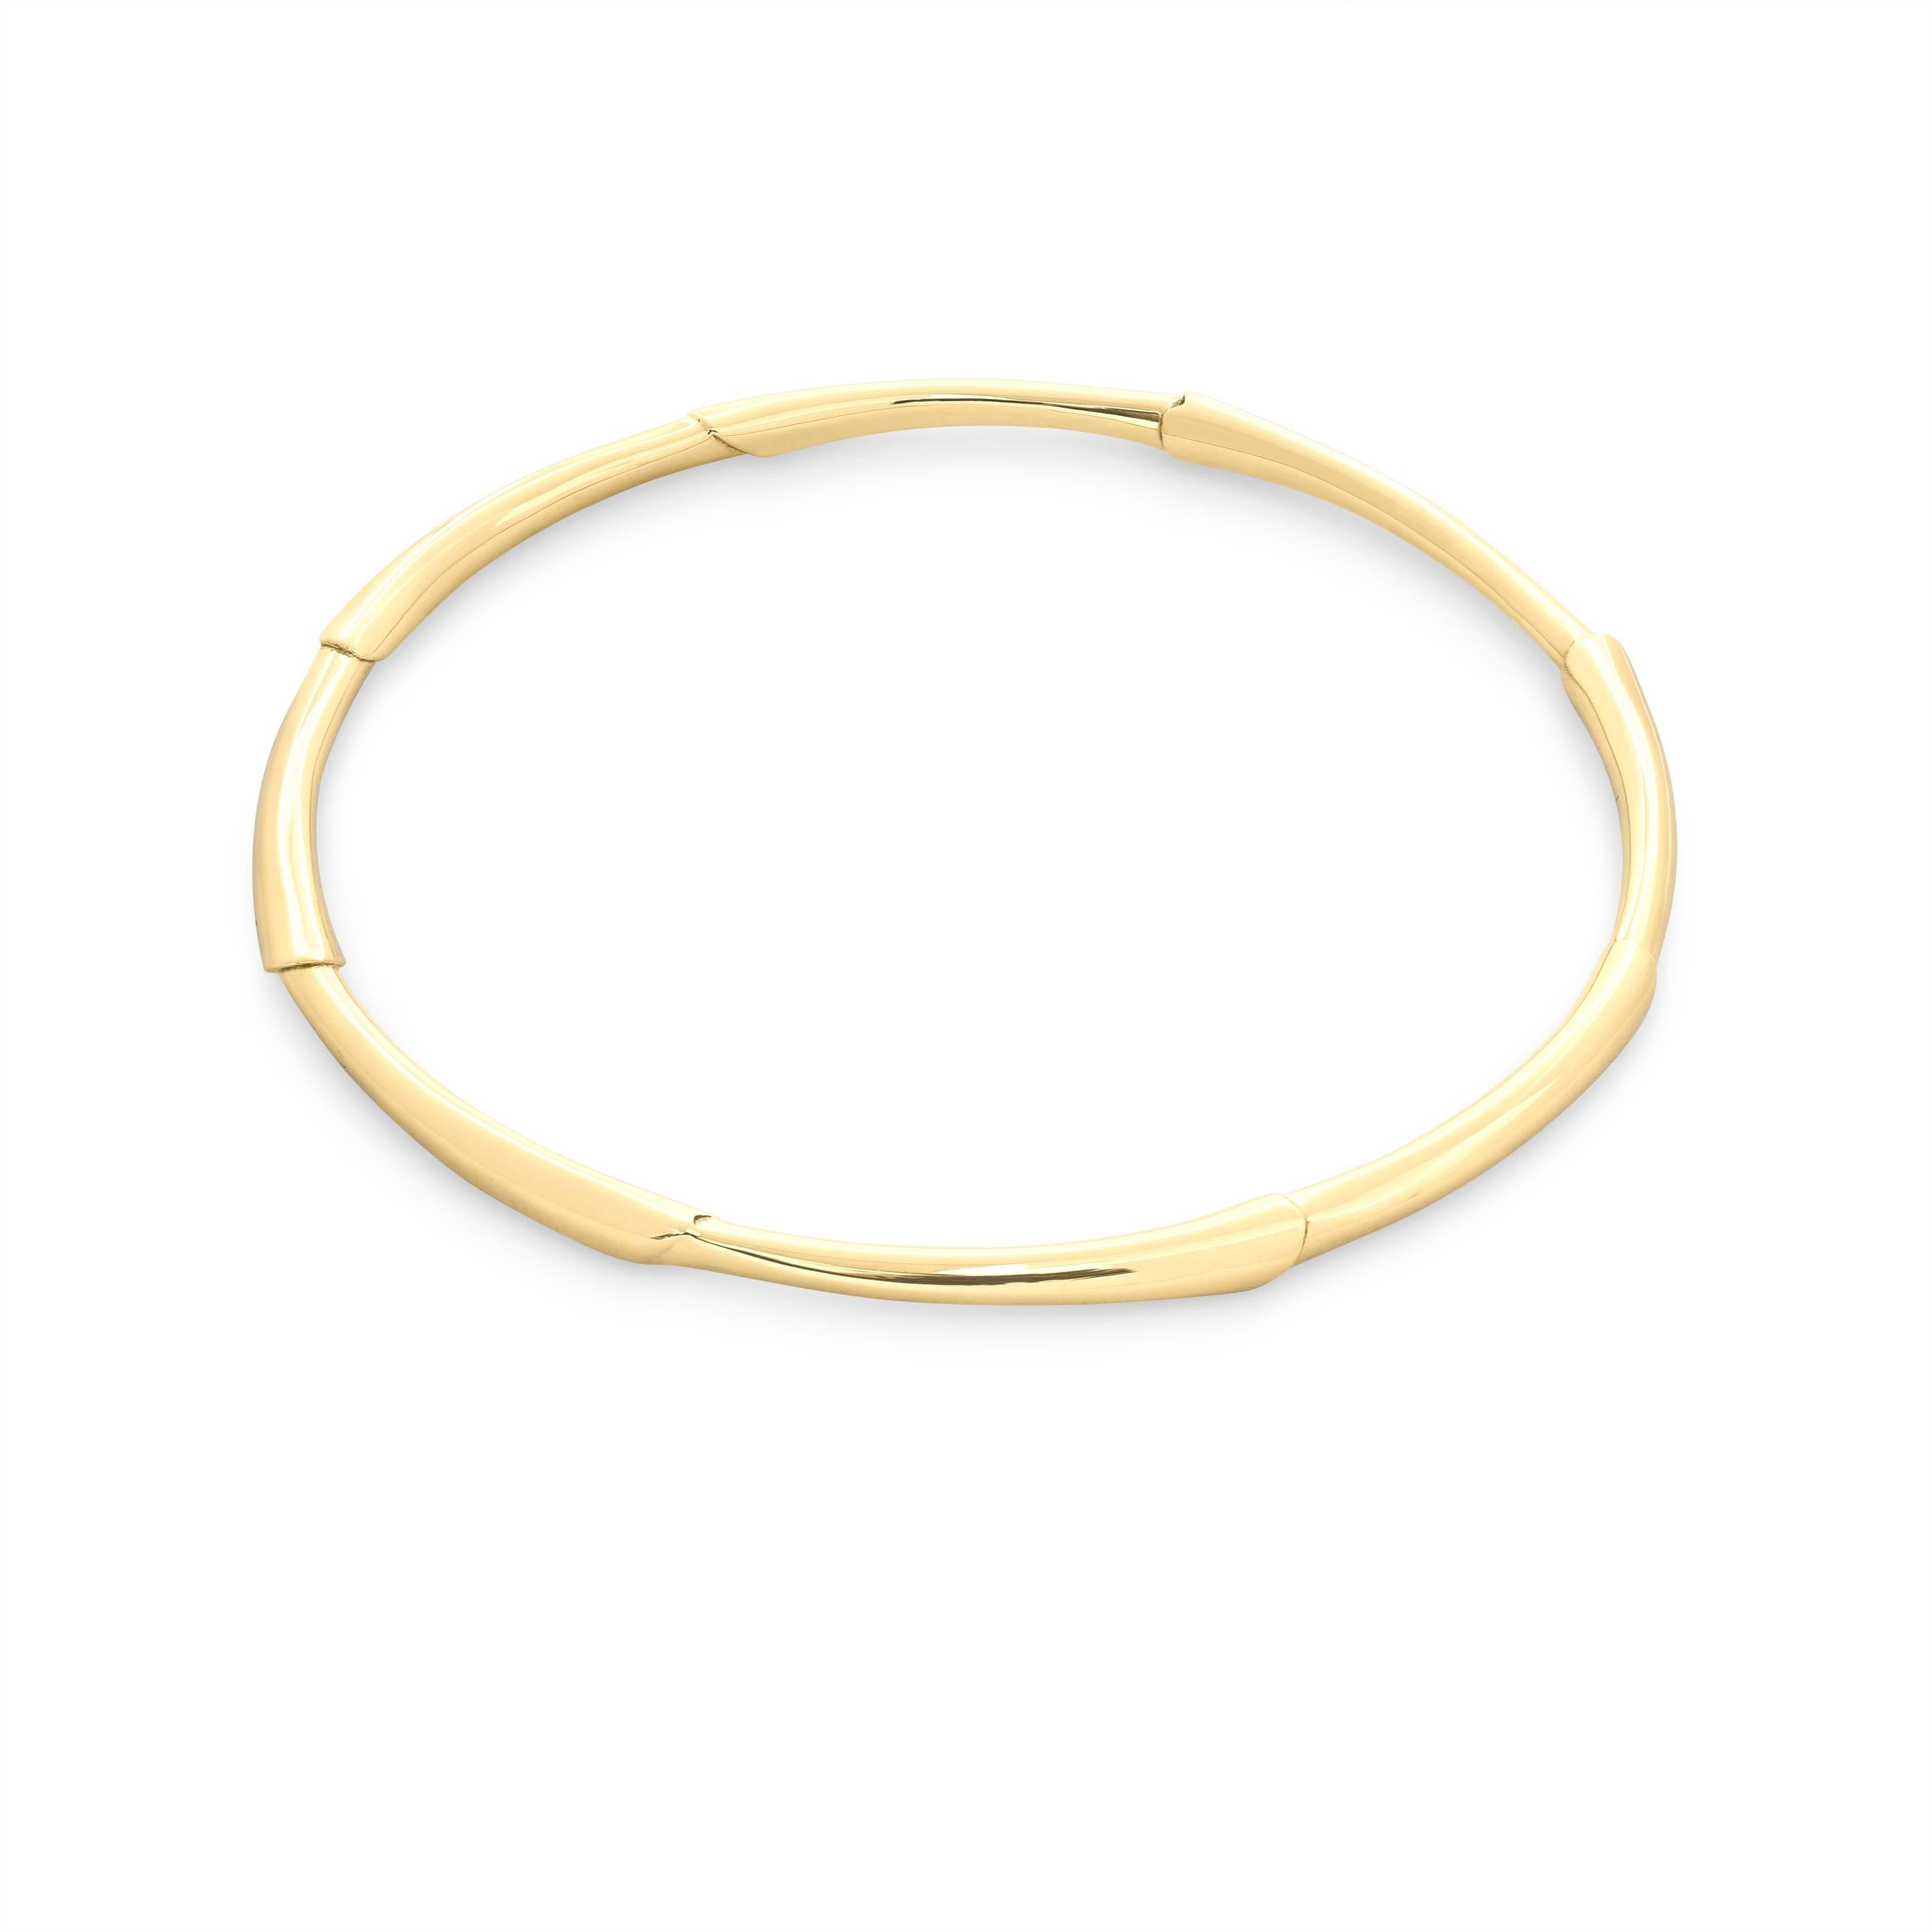 The Kula Bangle takes its name from the ancient tradition of Kula - where its inhabitants of the Trobriand Islands make regular pilgrimages around the circuit of participating archipelagos to exchange gifts of jewellery in return for status and